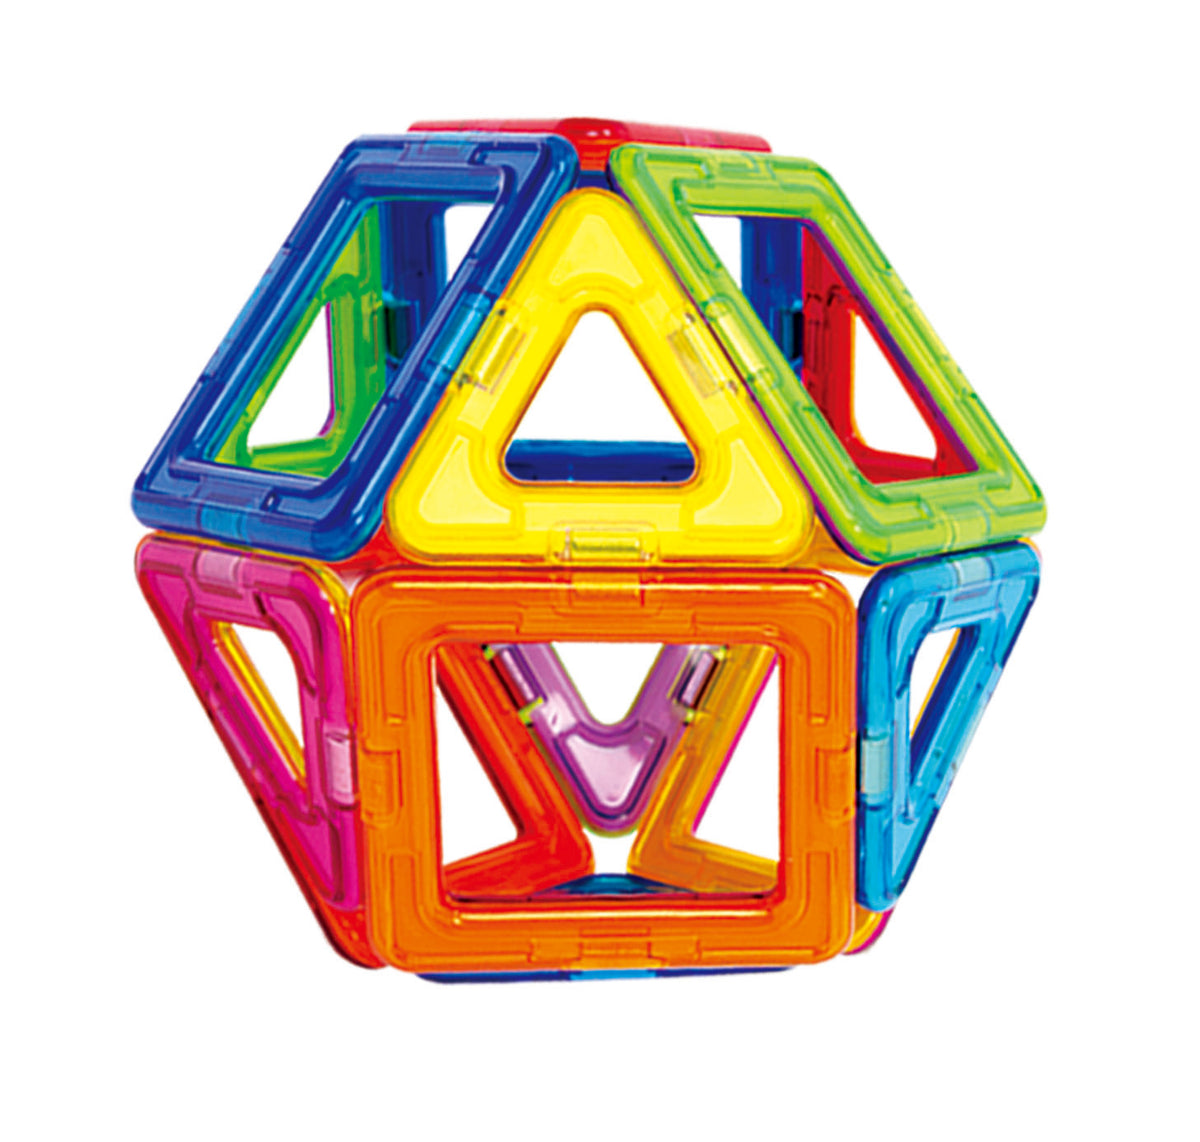 Magformers 14-piece magnetic construction STEM toy – Magformers